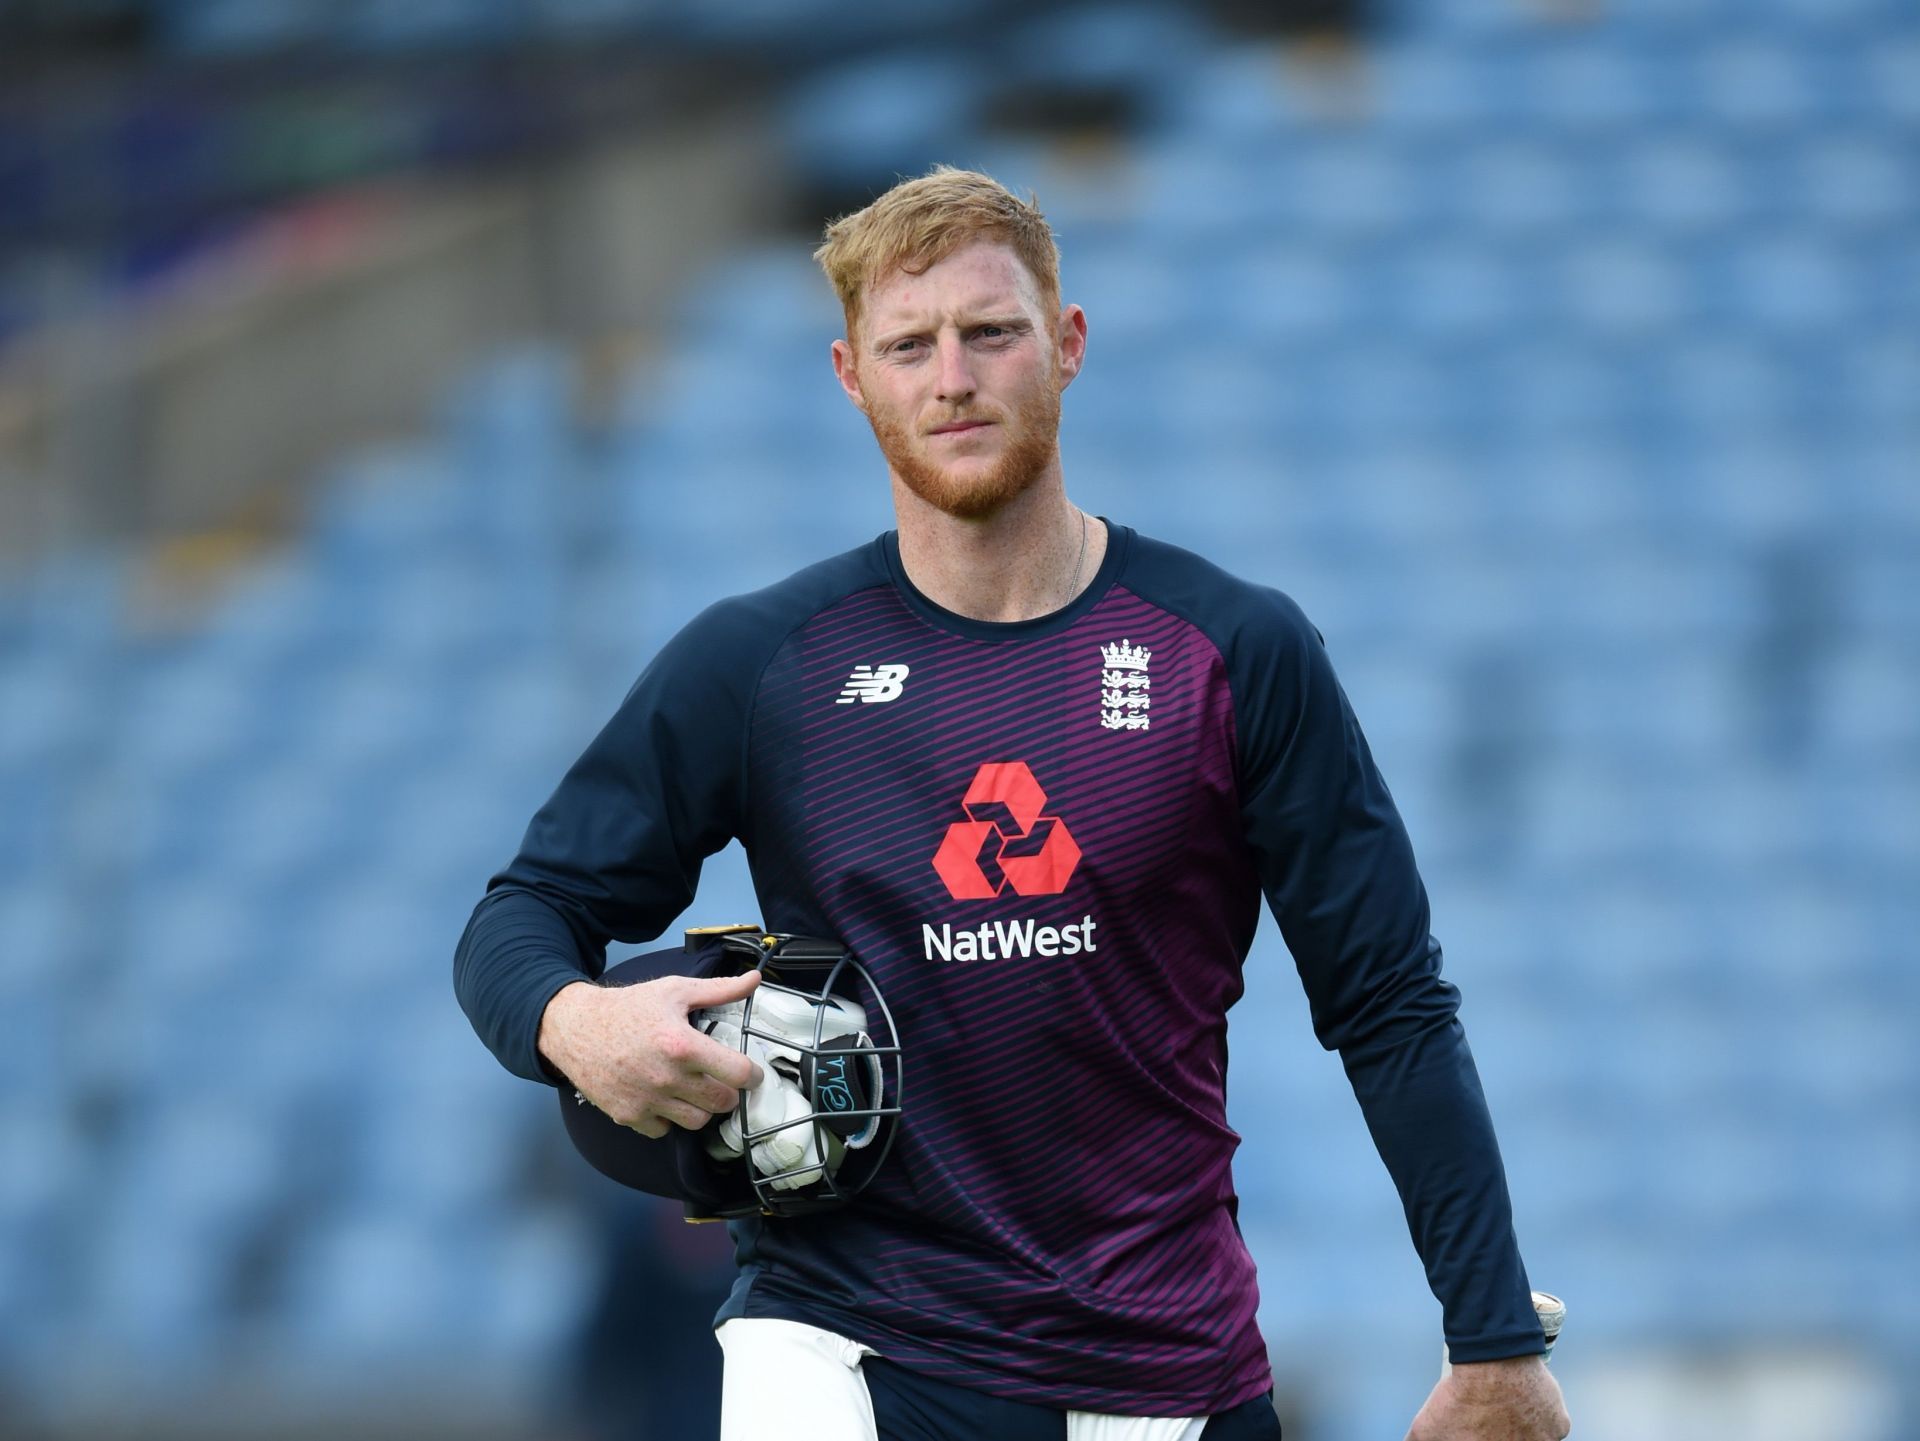 Ben Stokes was seen knocking a few at an indoor facility on Thursday